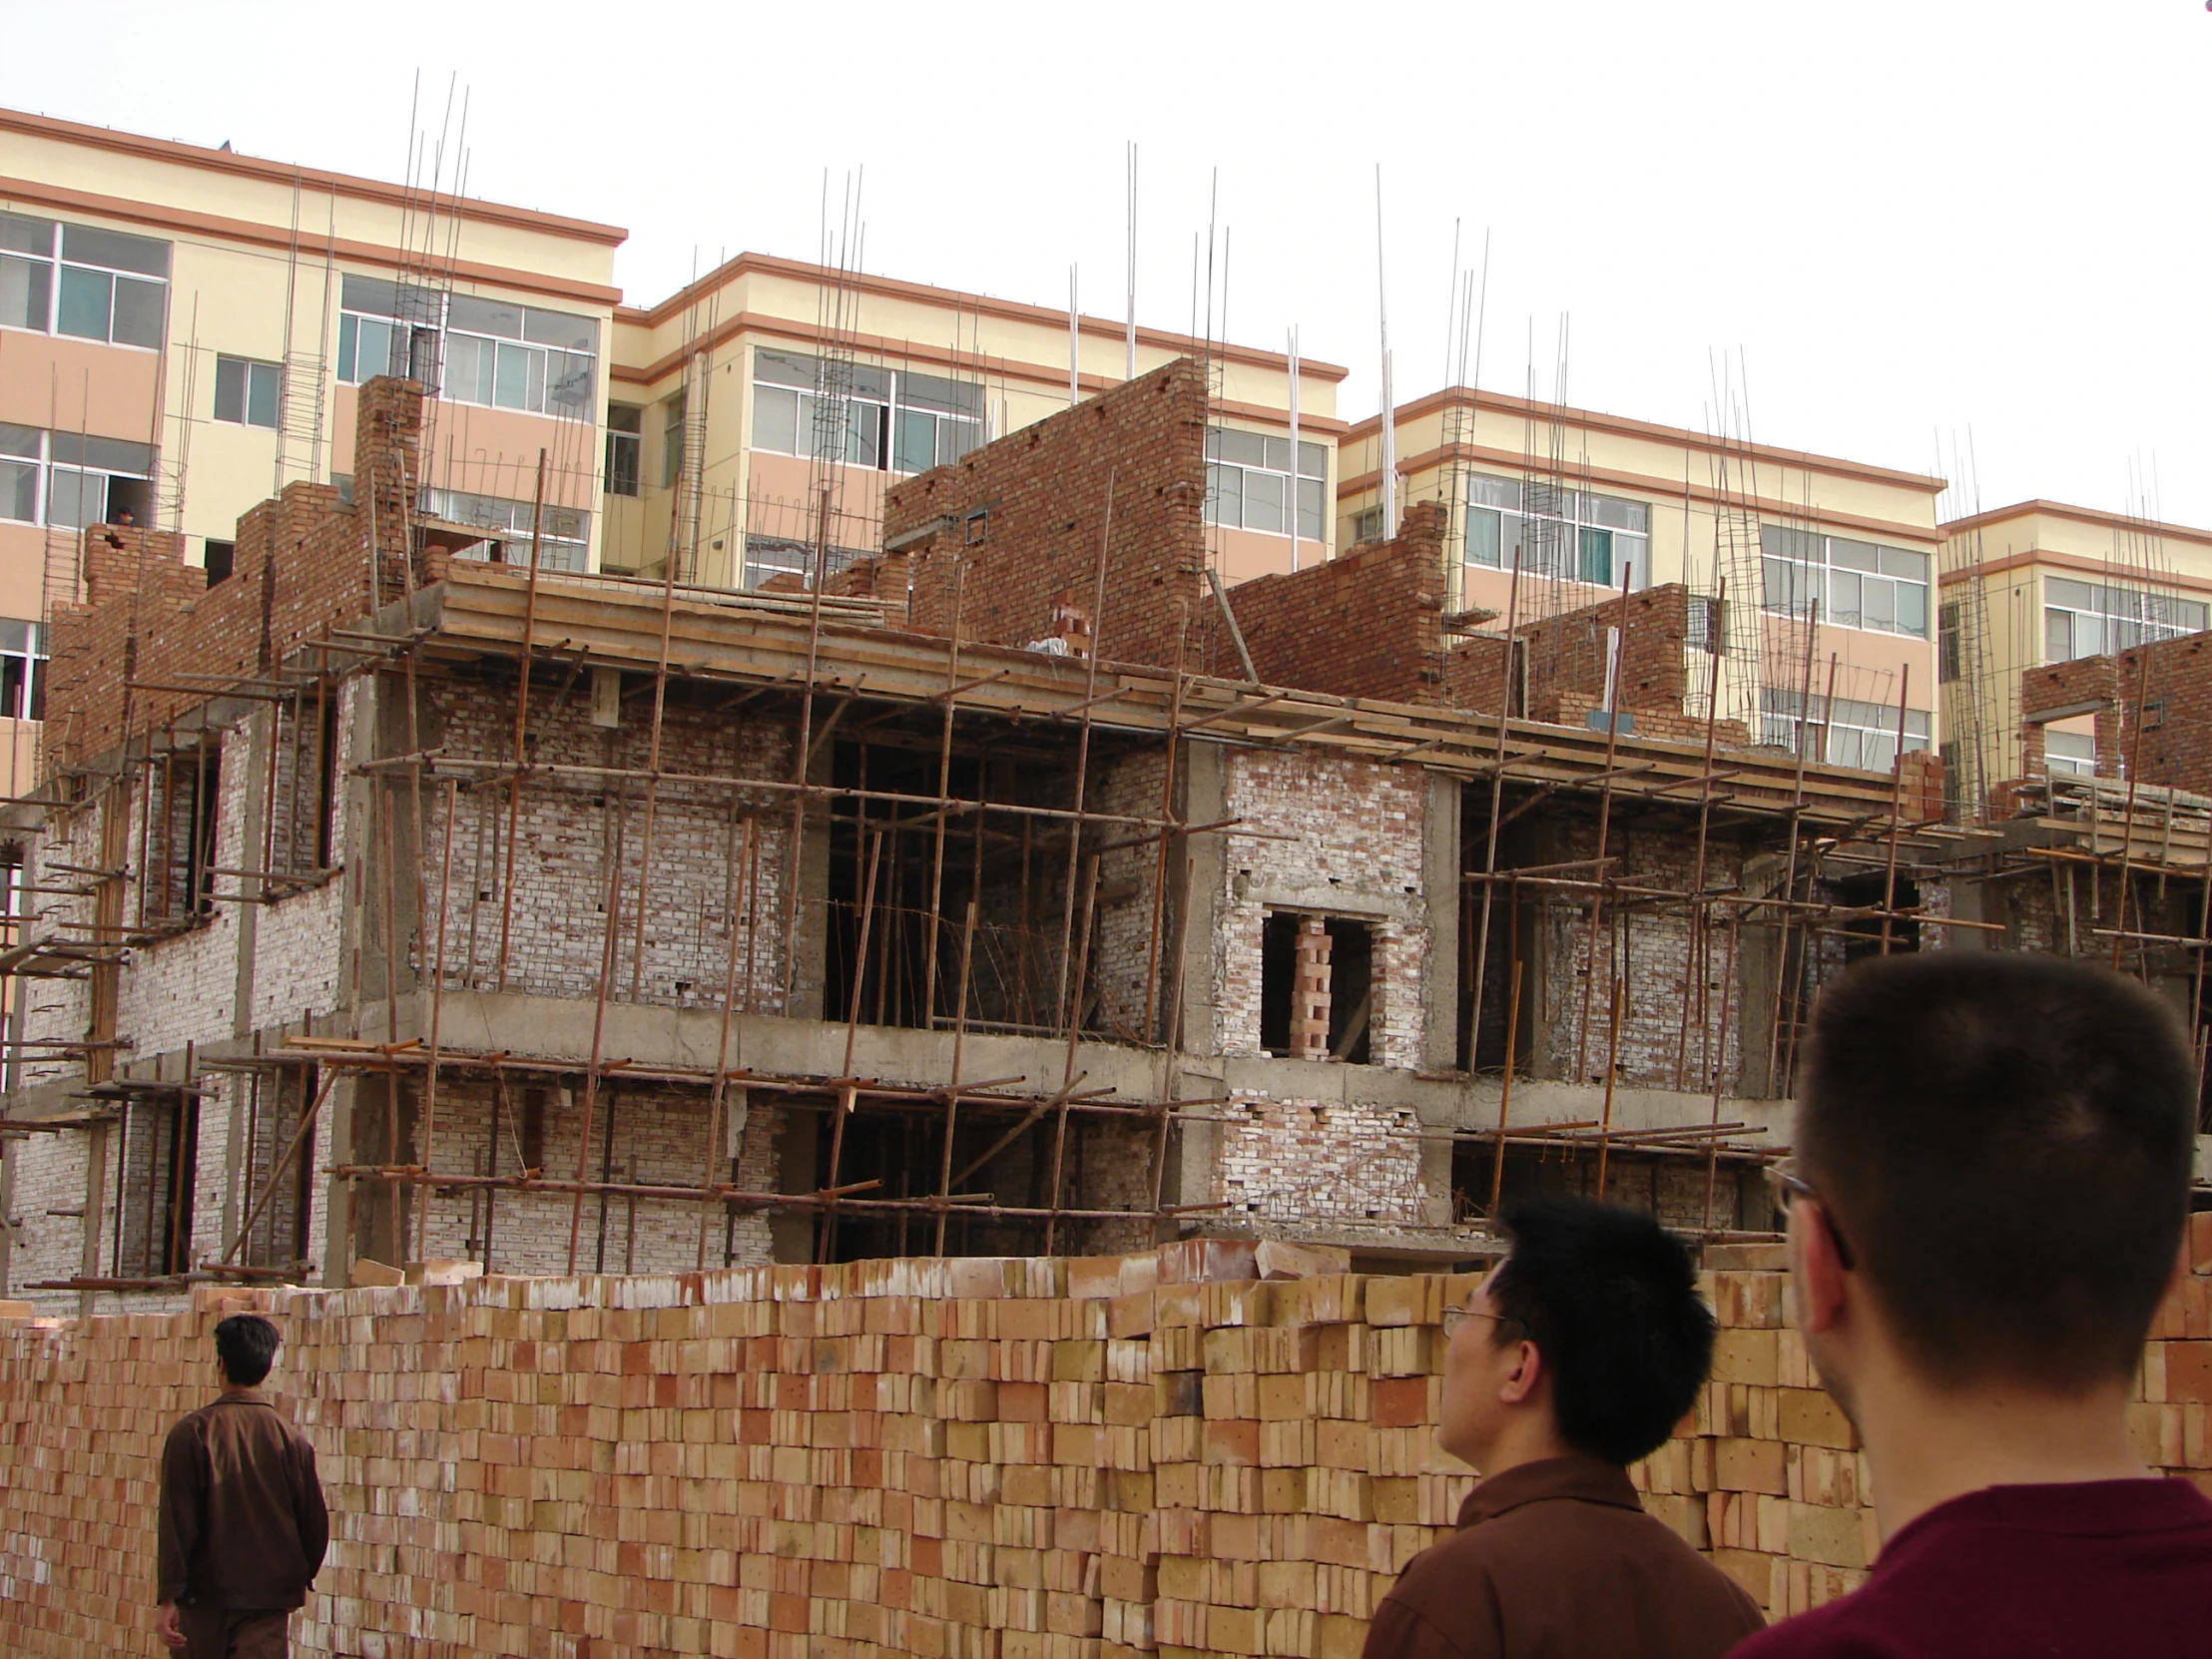 two people standing in front of a brick building under construction